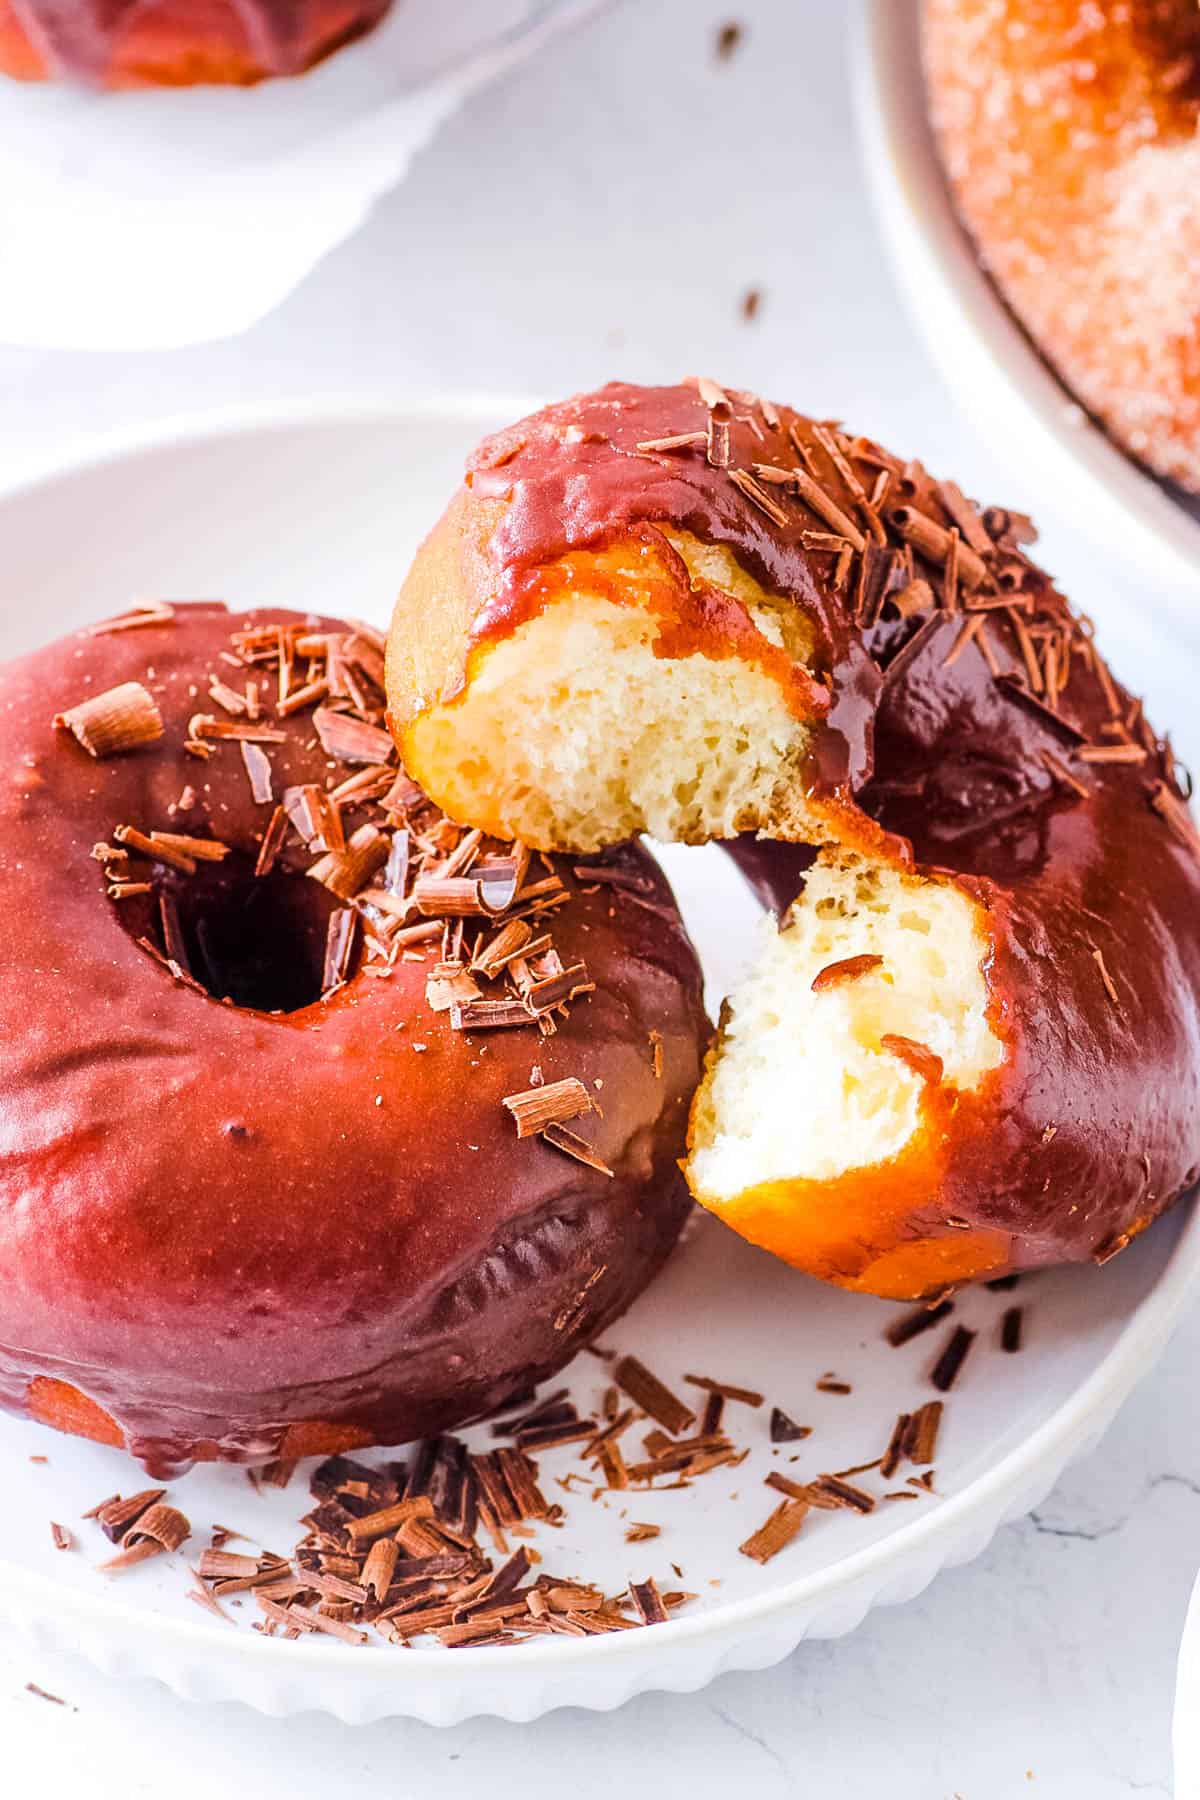 Eggless donuts, glazed with c،colate glaze, served on a white plate.